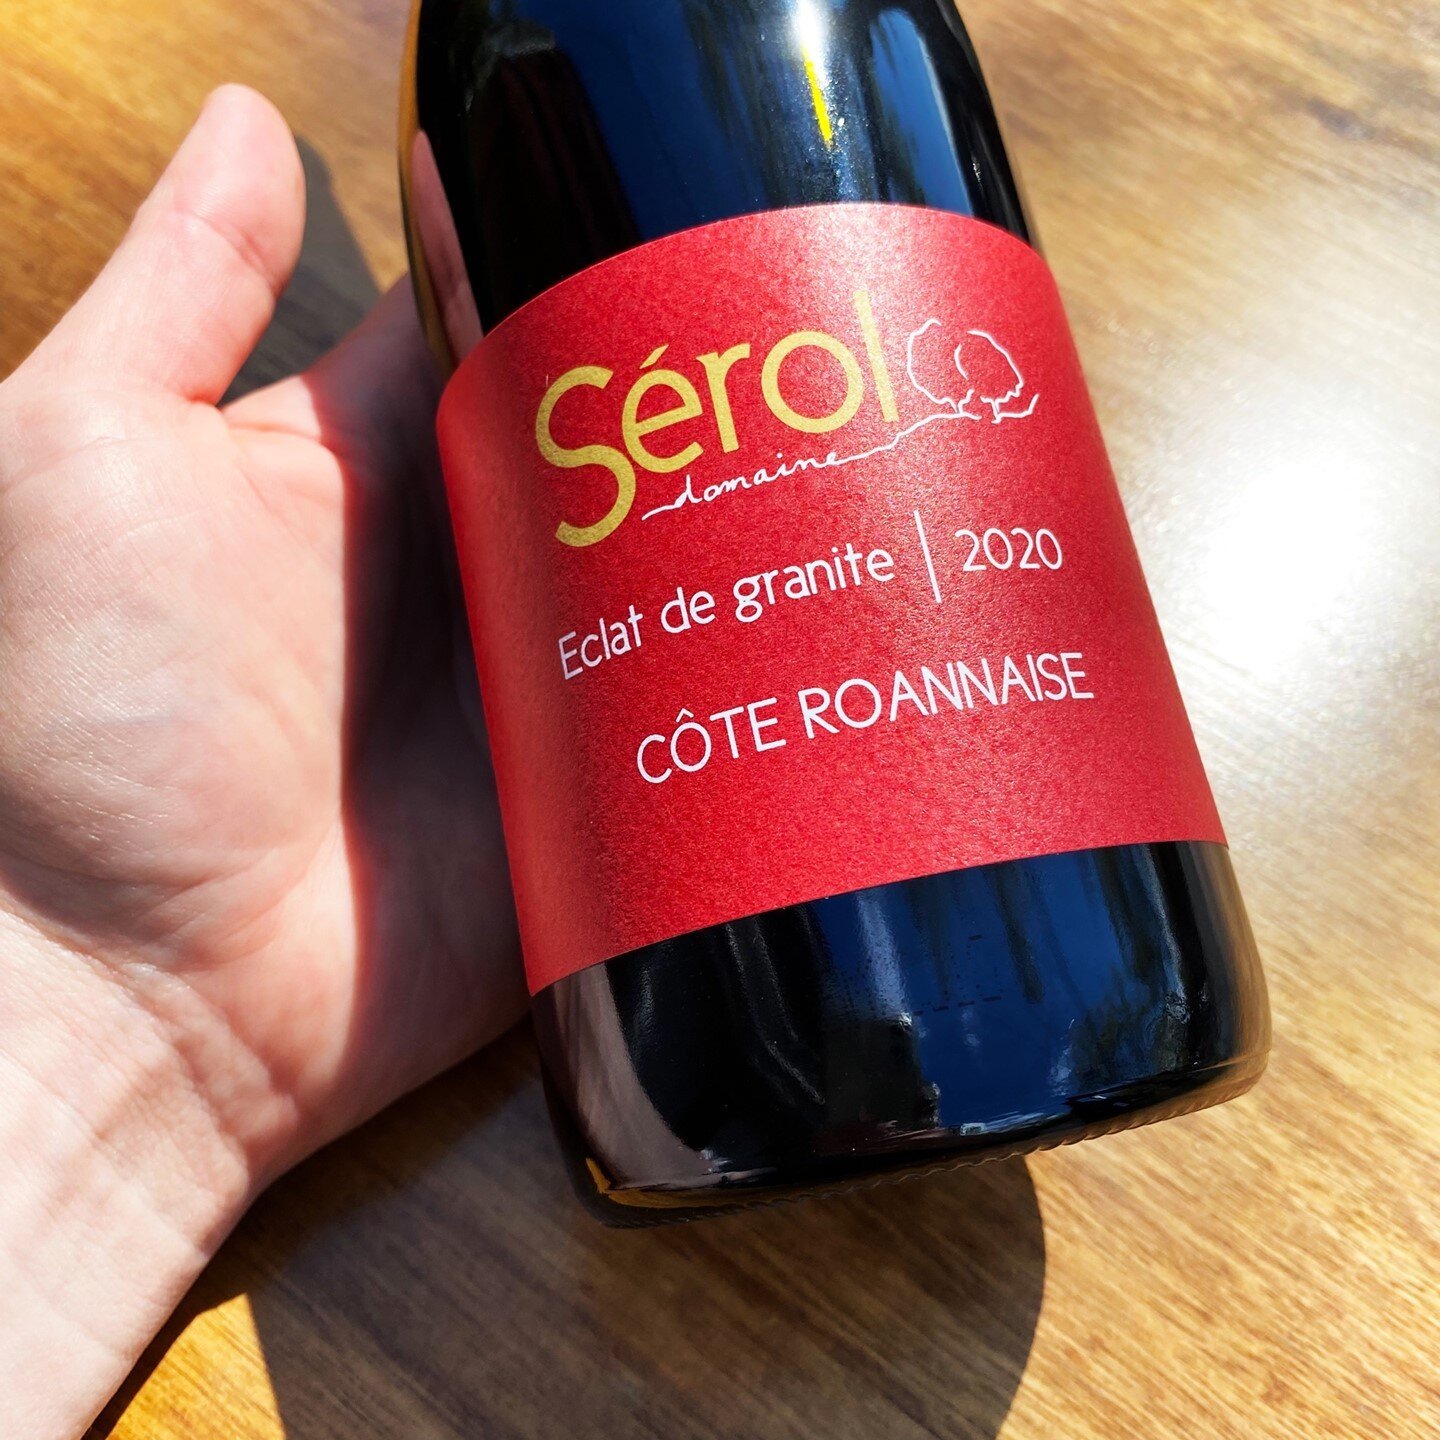 🇫🇷 New Release! 🇫🇷⁠
⁠
🍷 2020 Domaine S&eacute;rol 'Eclat de Granit&rsquo; C&ocirc;tes Roannaise AOP 🍷⁠
⁠
Glorious Gamay Alert!⁠ Certified organic &amp; biodynamic ❤️⁠
⁠
A blend of various vineyards with an average vine age of 30 years. 50% whol